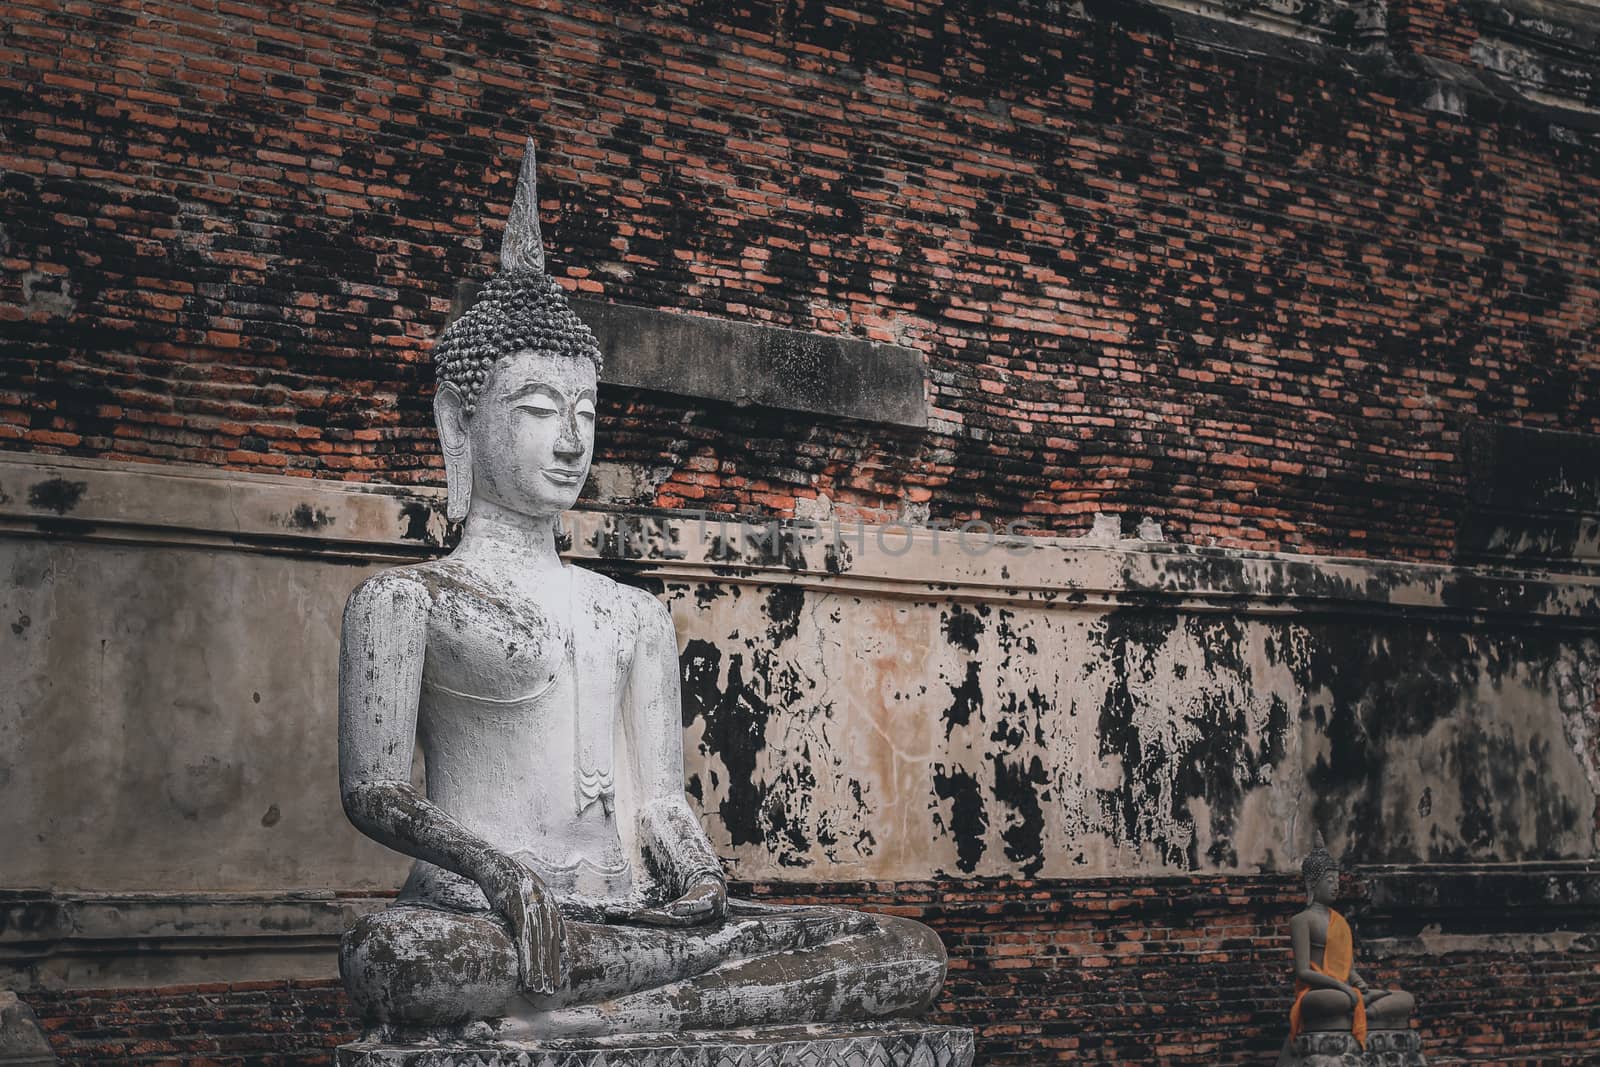 Statue of Buddha at the Ayutthaya Historical Park showing the religion, local thai culture and history of Thailand